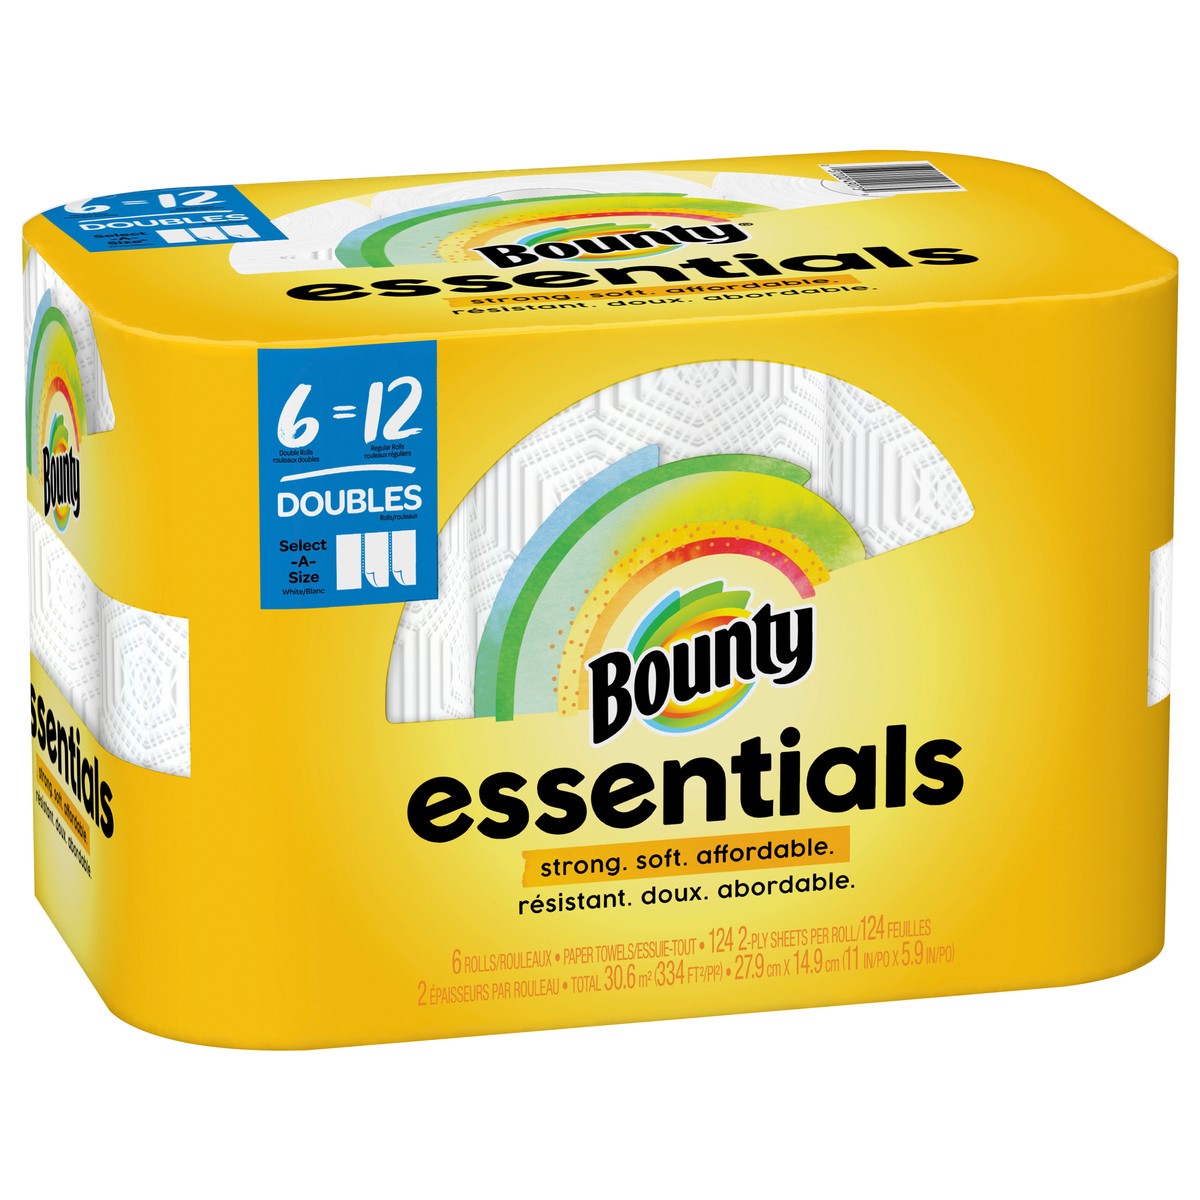 slide 3 of 5, Bounty Essentials Paper Towel Select A Size 6 Double Roll, 1 ct